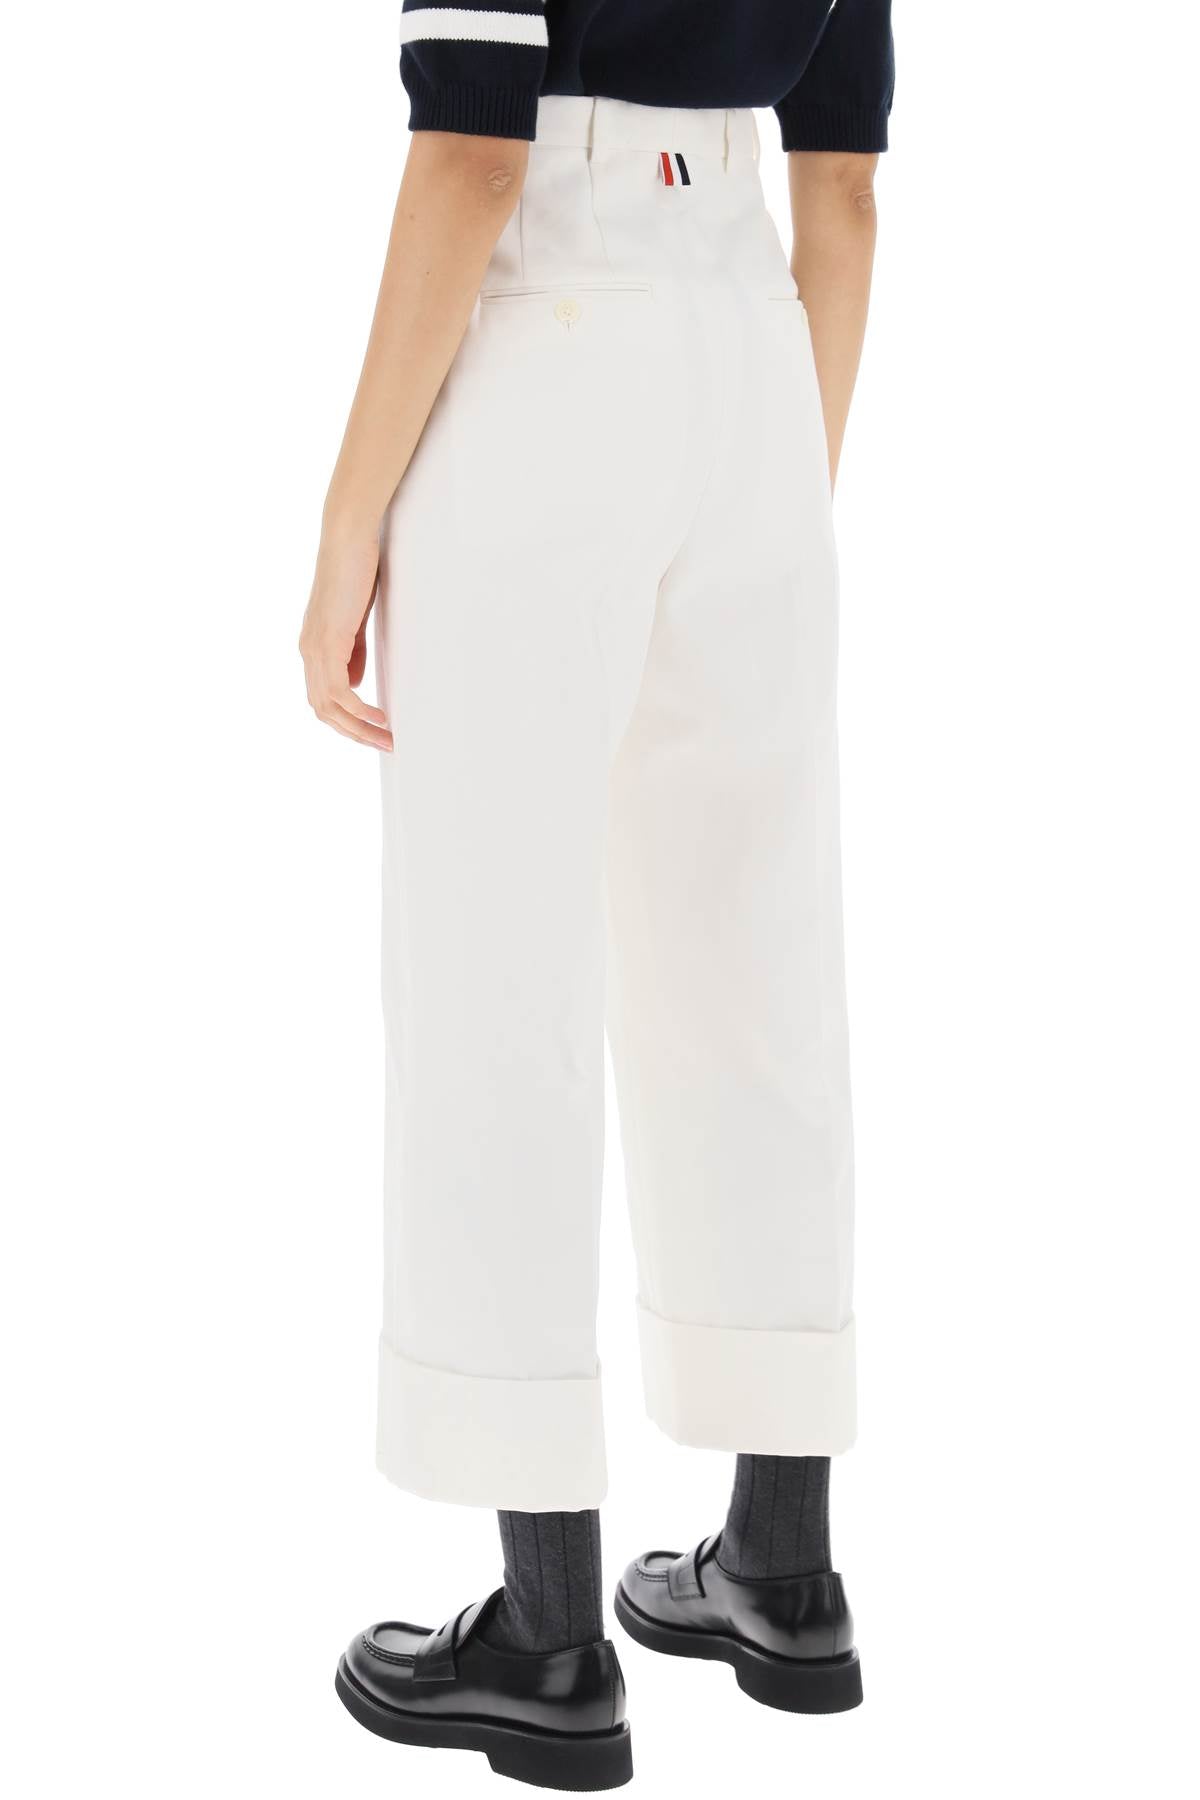 Thom browne cropped wide leg jeans-2